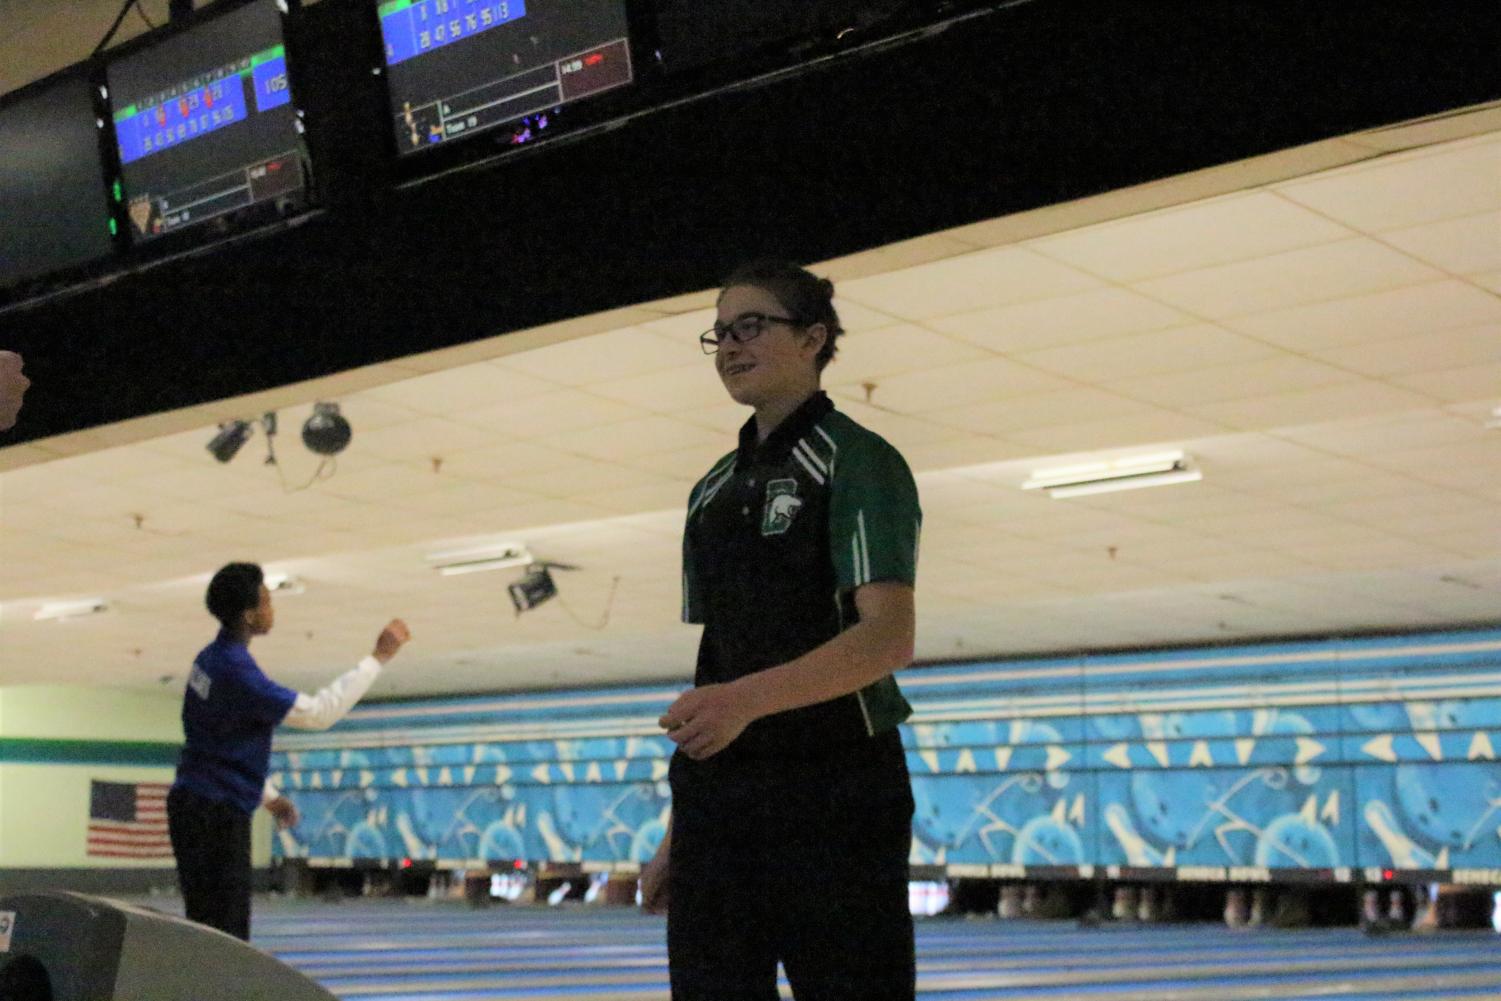 Derby+High+School%3A+Bowling+Invitationals+%28Photos+by+Janeah+Berry%29